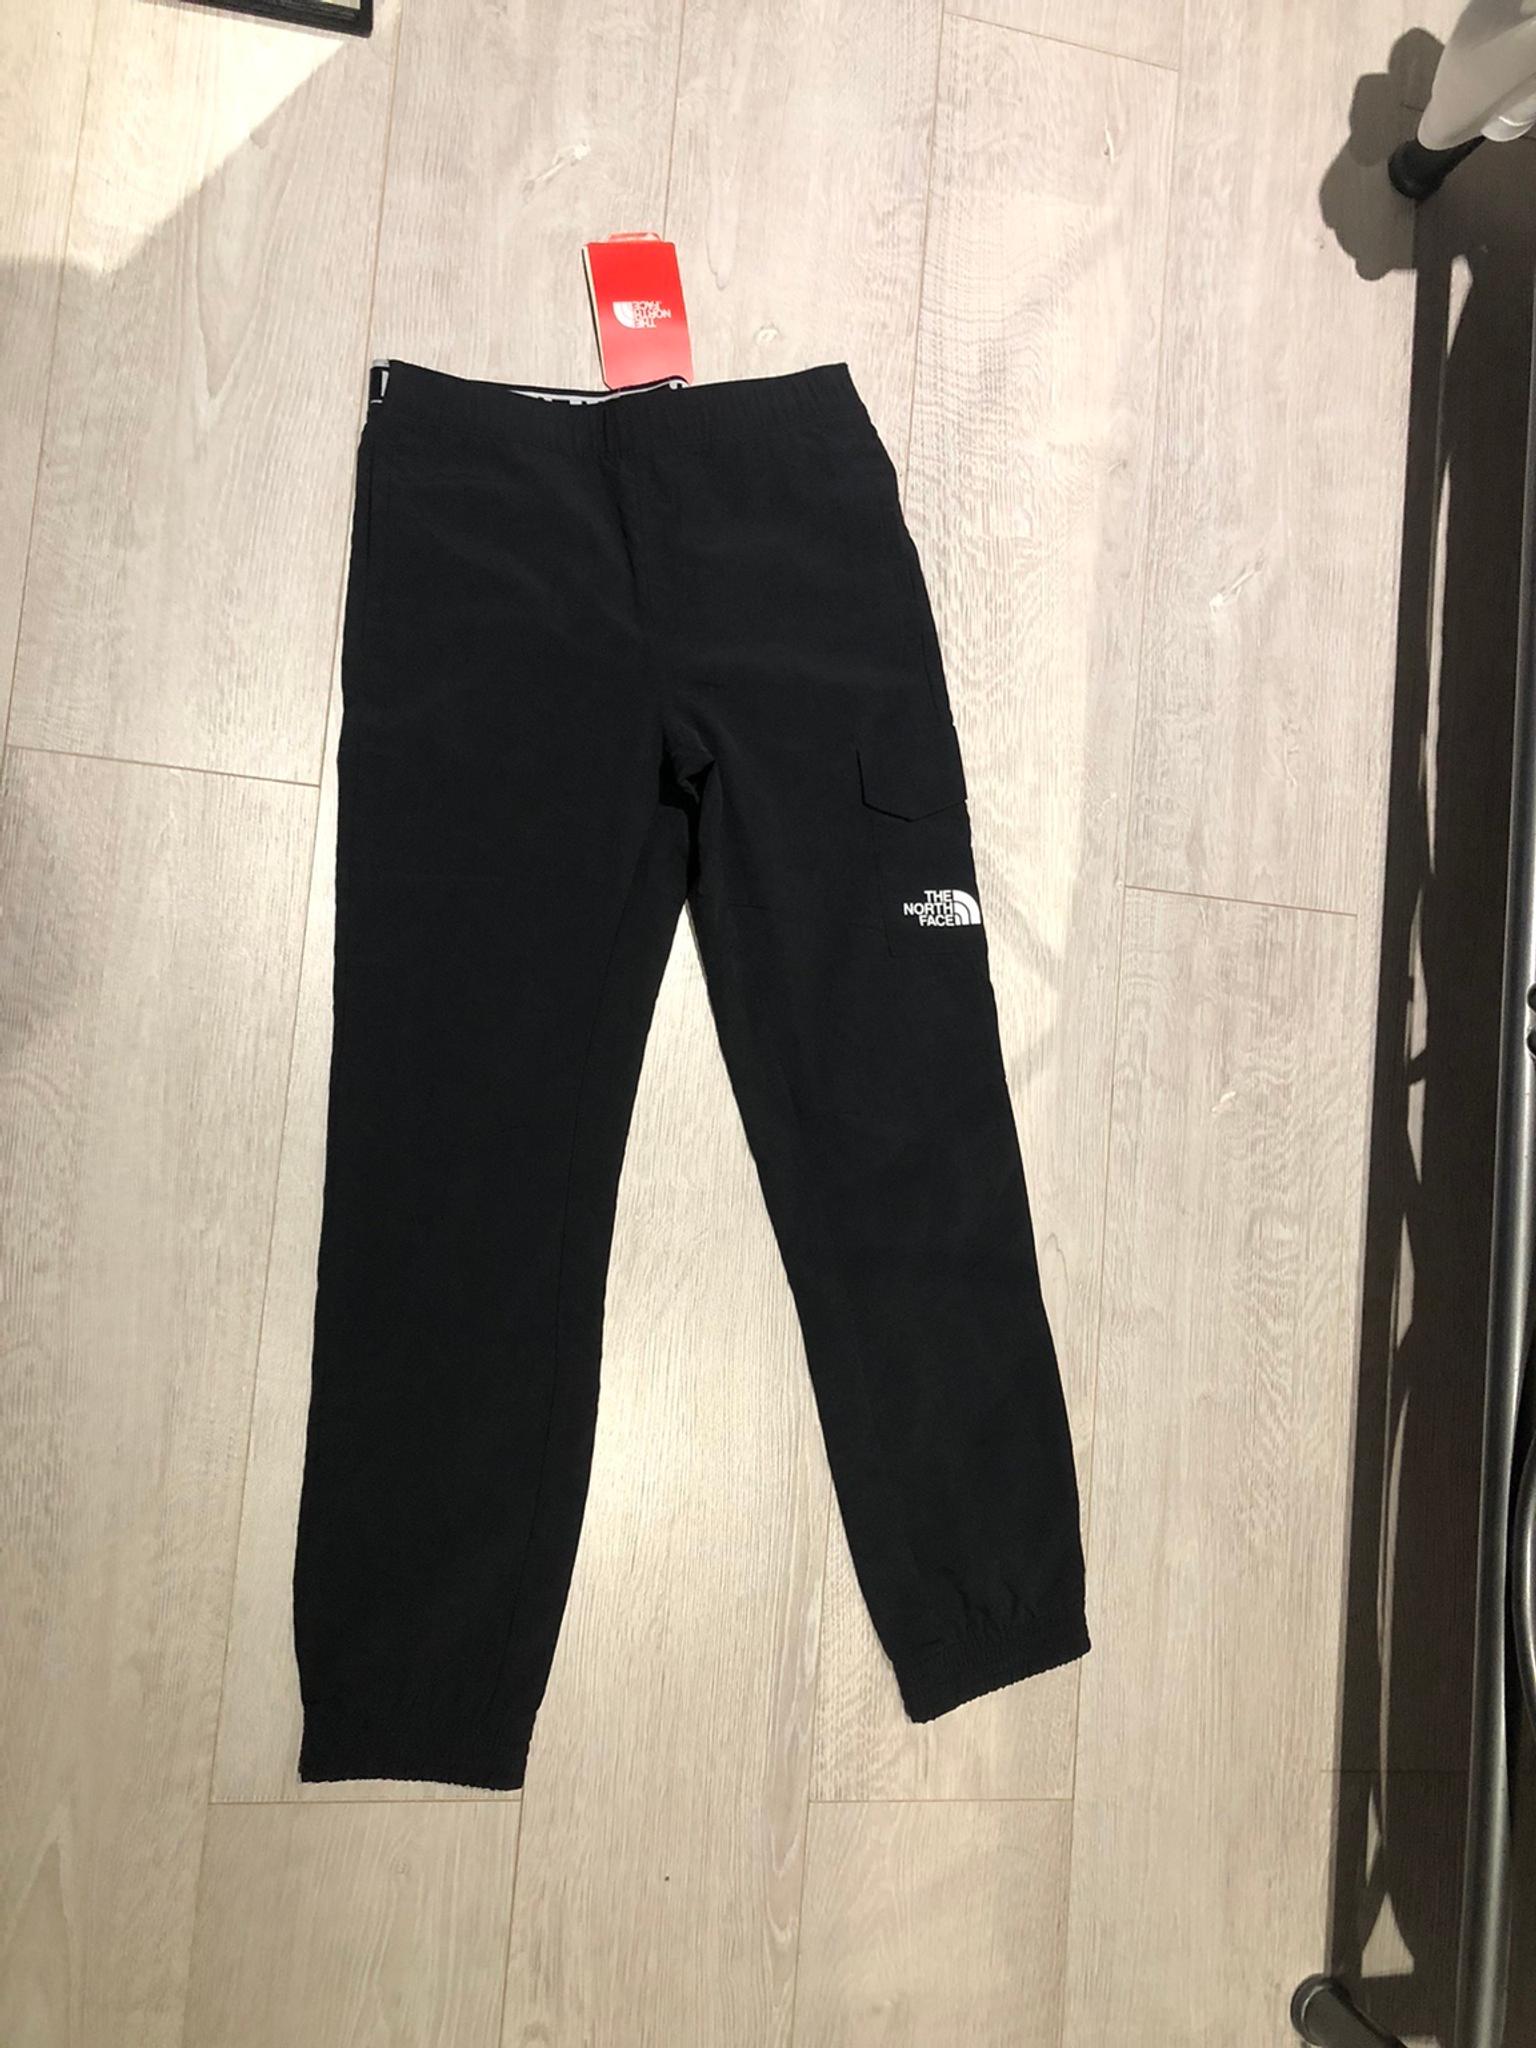 north face cargo pants jd